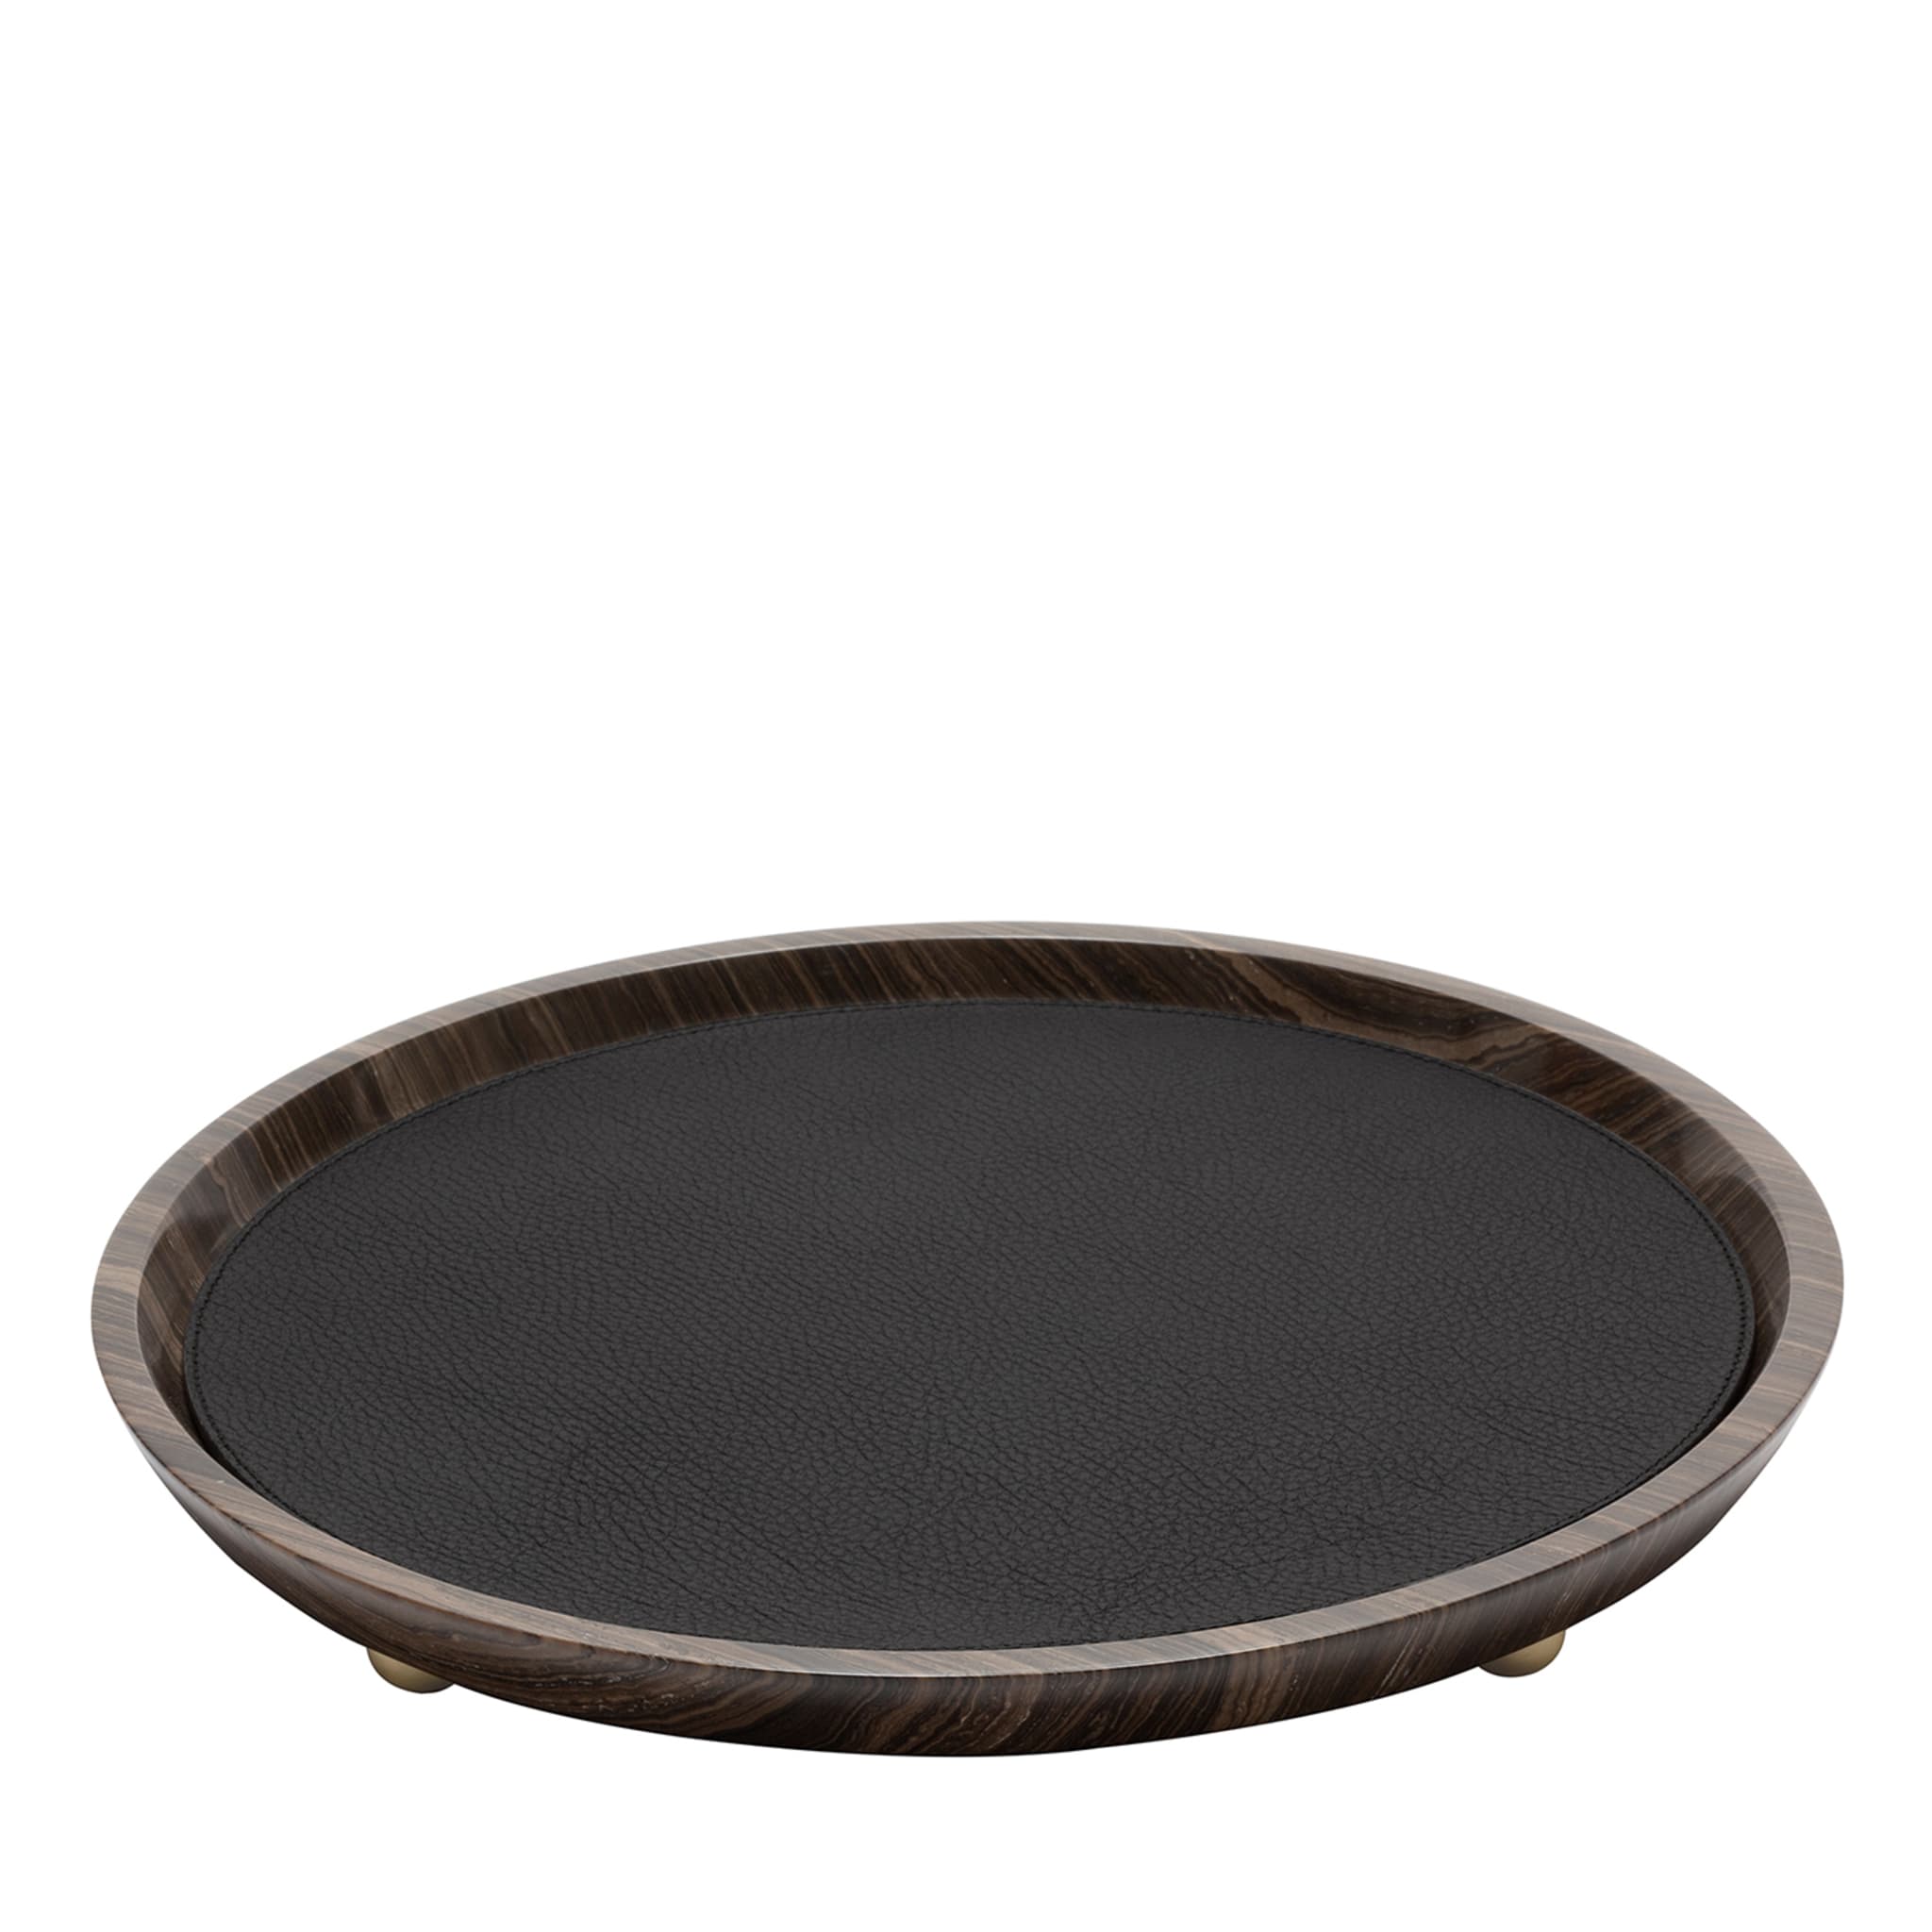 Monza Leather & Marble Round Large Valet Trays #1 - Main view